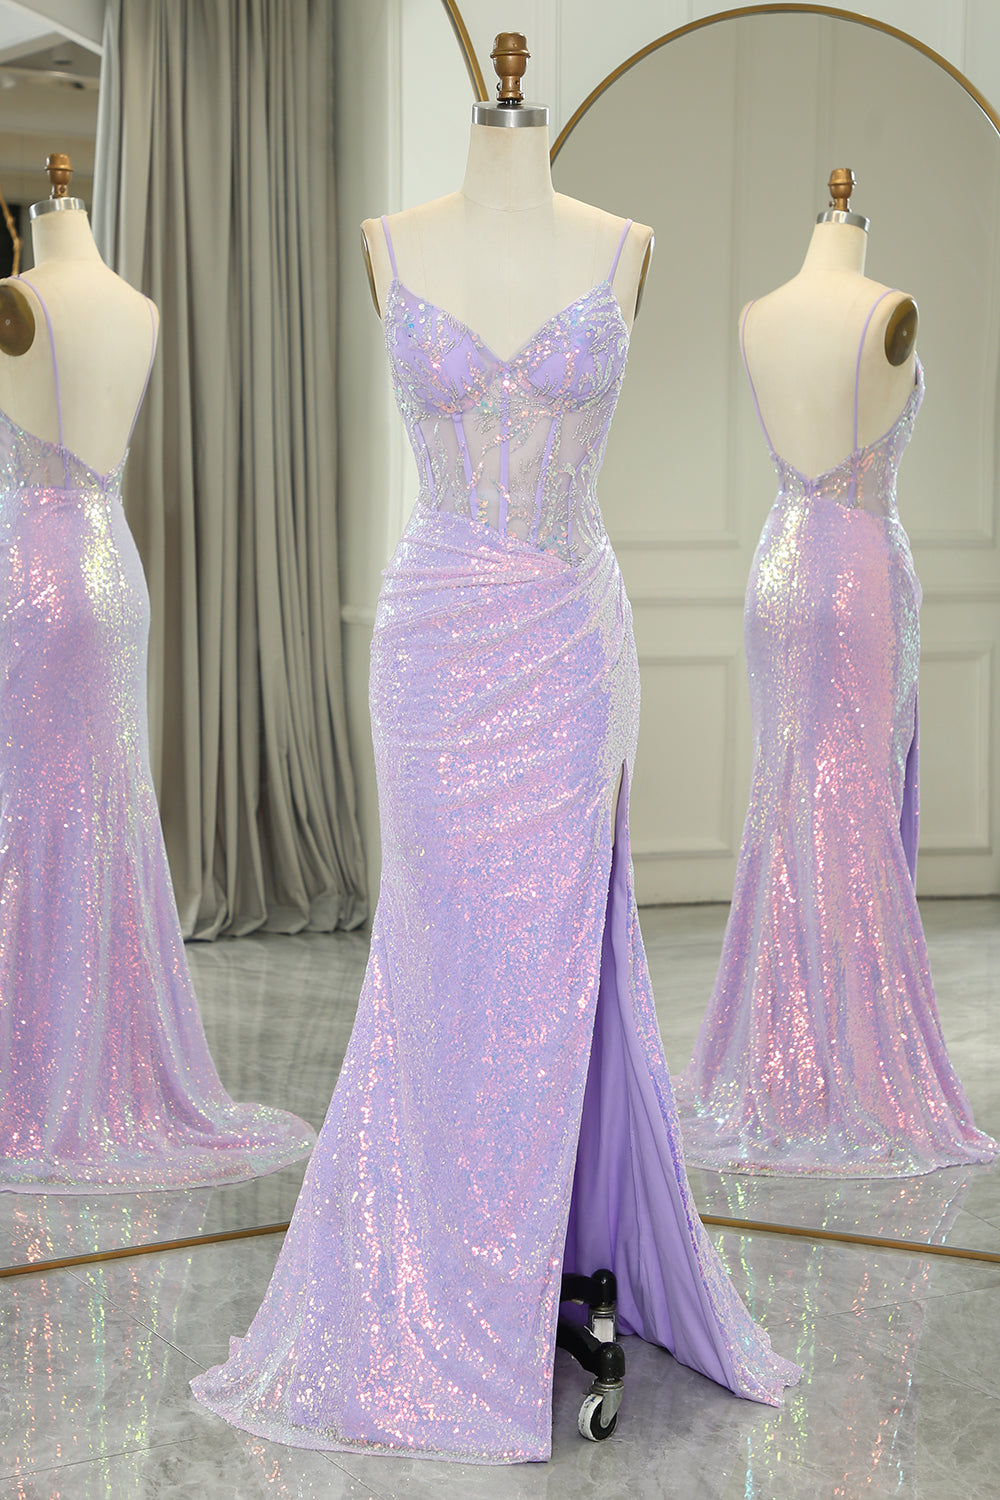 Sparkly Lilac Spaghetti Straps Mermaid Long Backless Corset Prom Dress With Split outfit, Prom Dresses Country